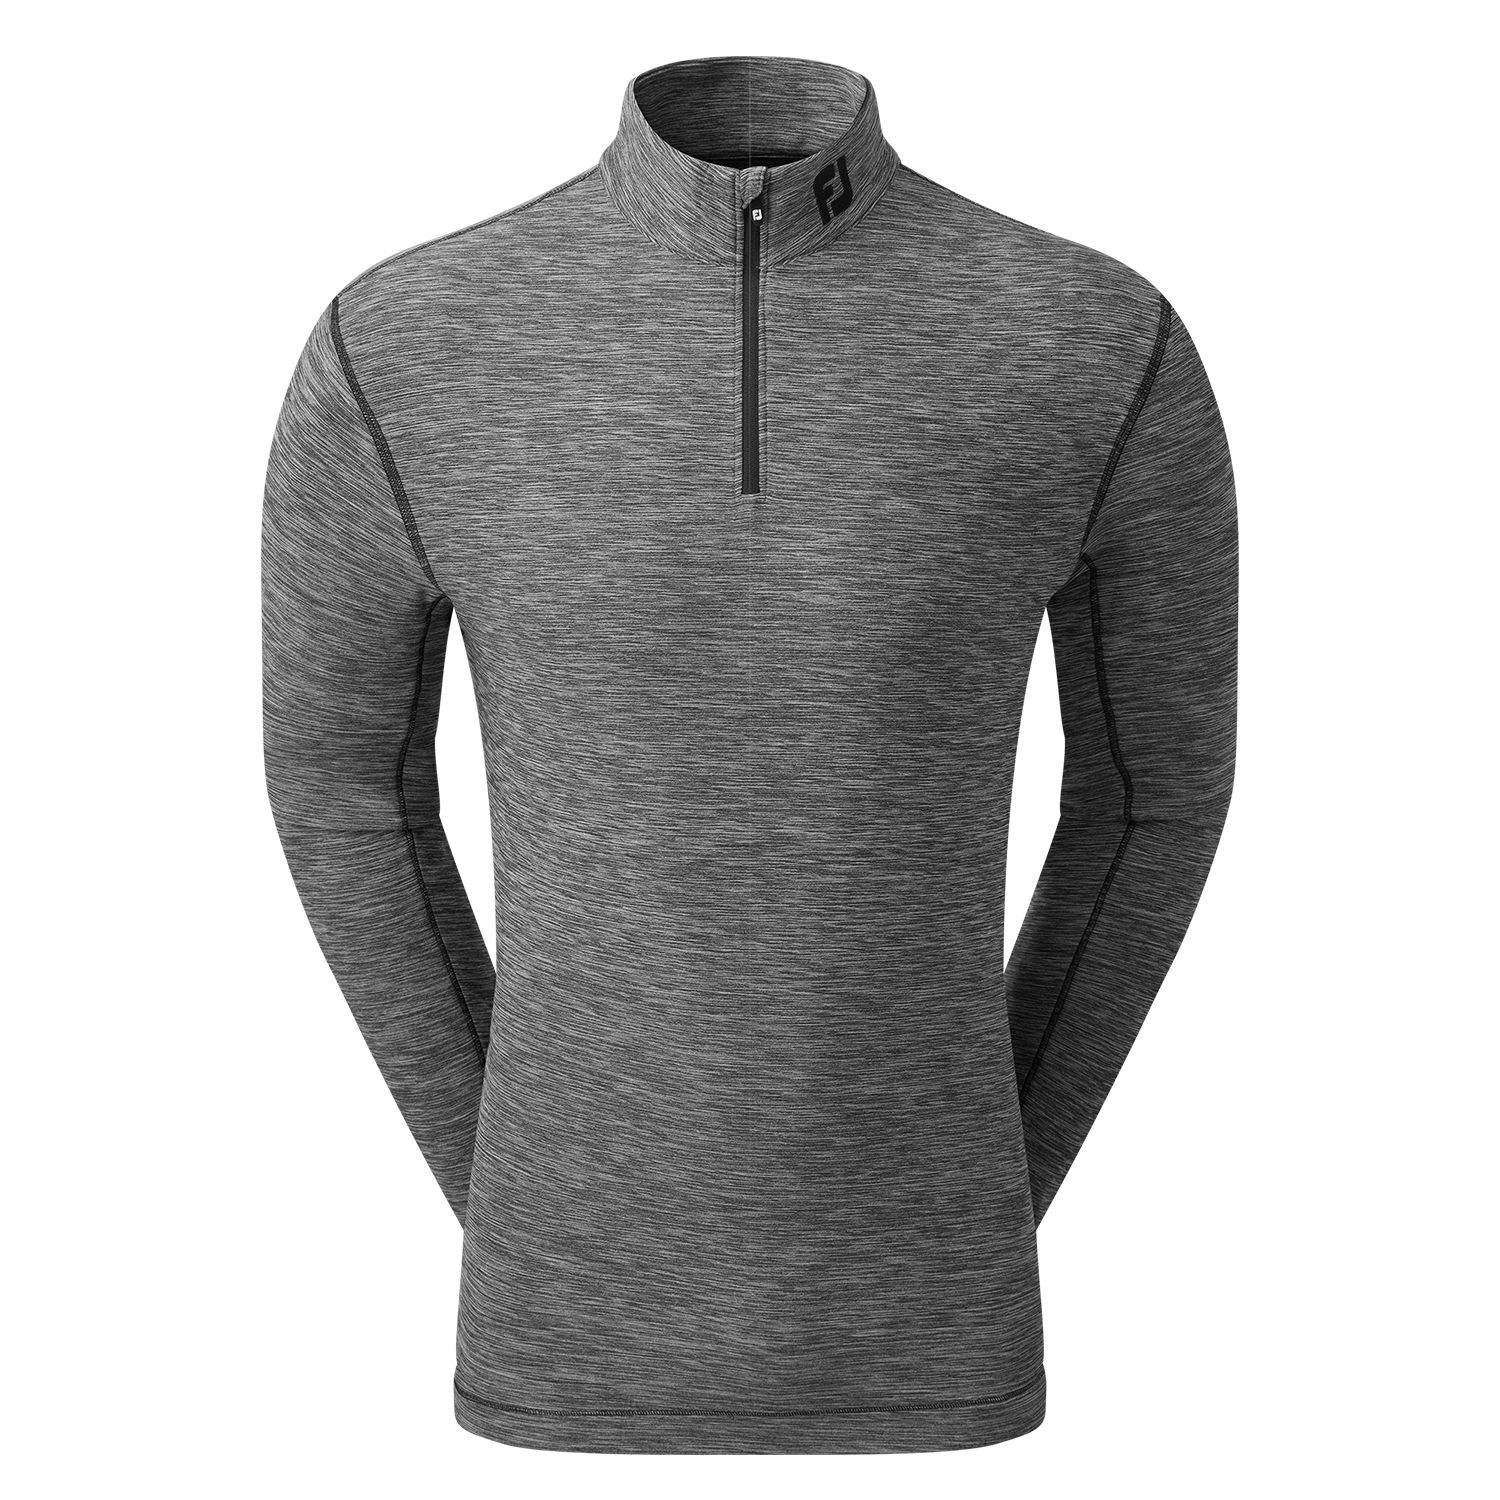 FootJoy Heather Space Dye Chill Out Zip Neck Golf Sweater